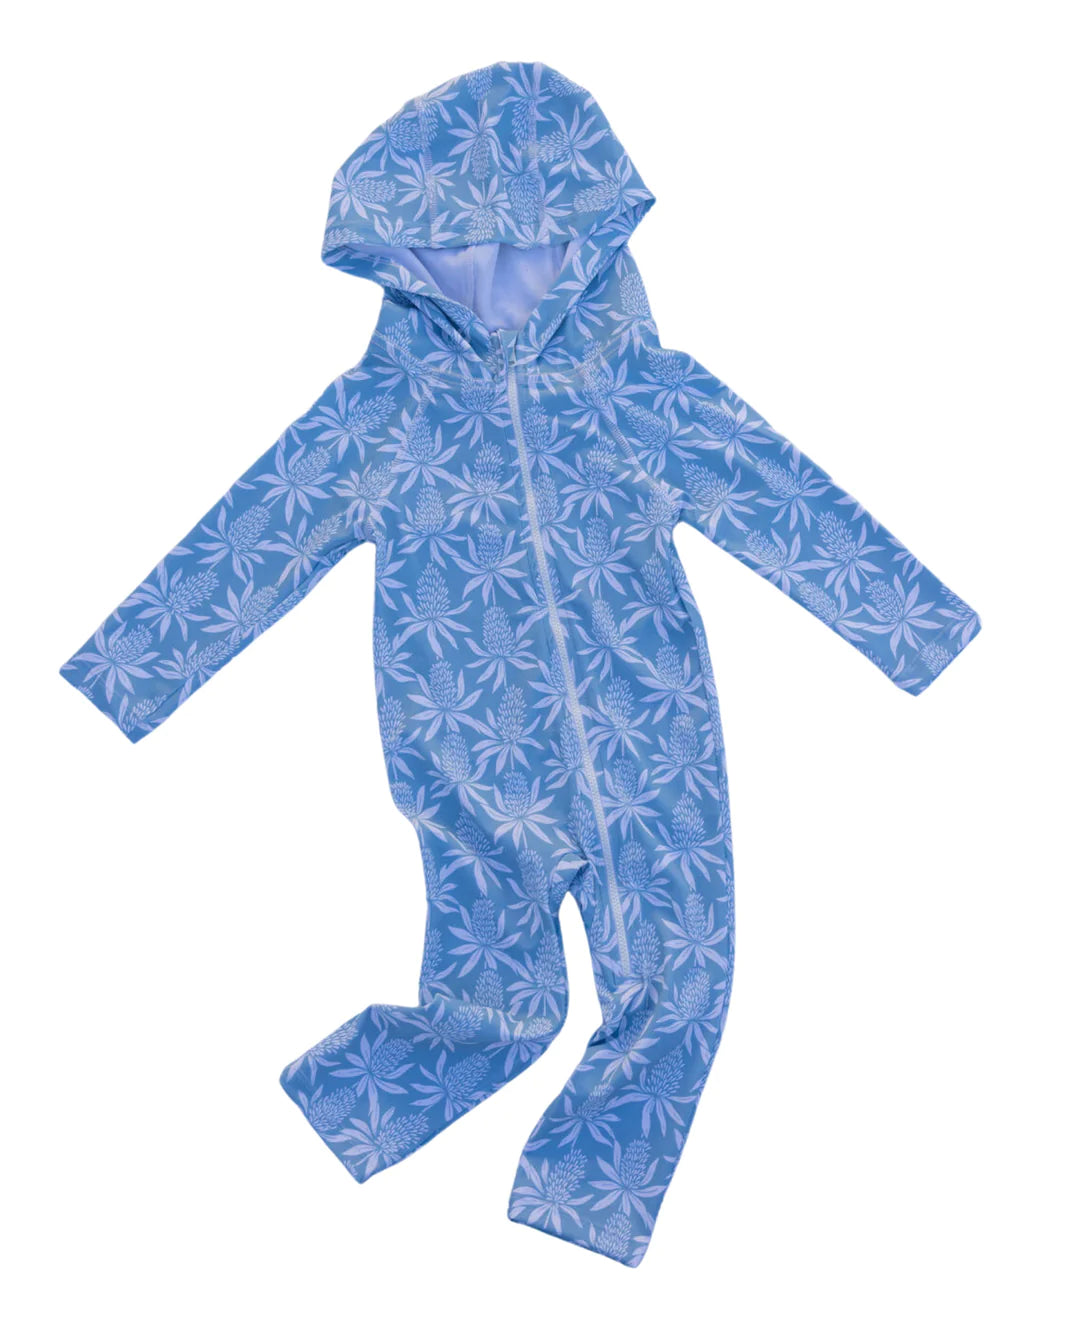 Baby & Toddler SPF 50+ Hooded Sunsuit by Lake Label - color Pine